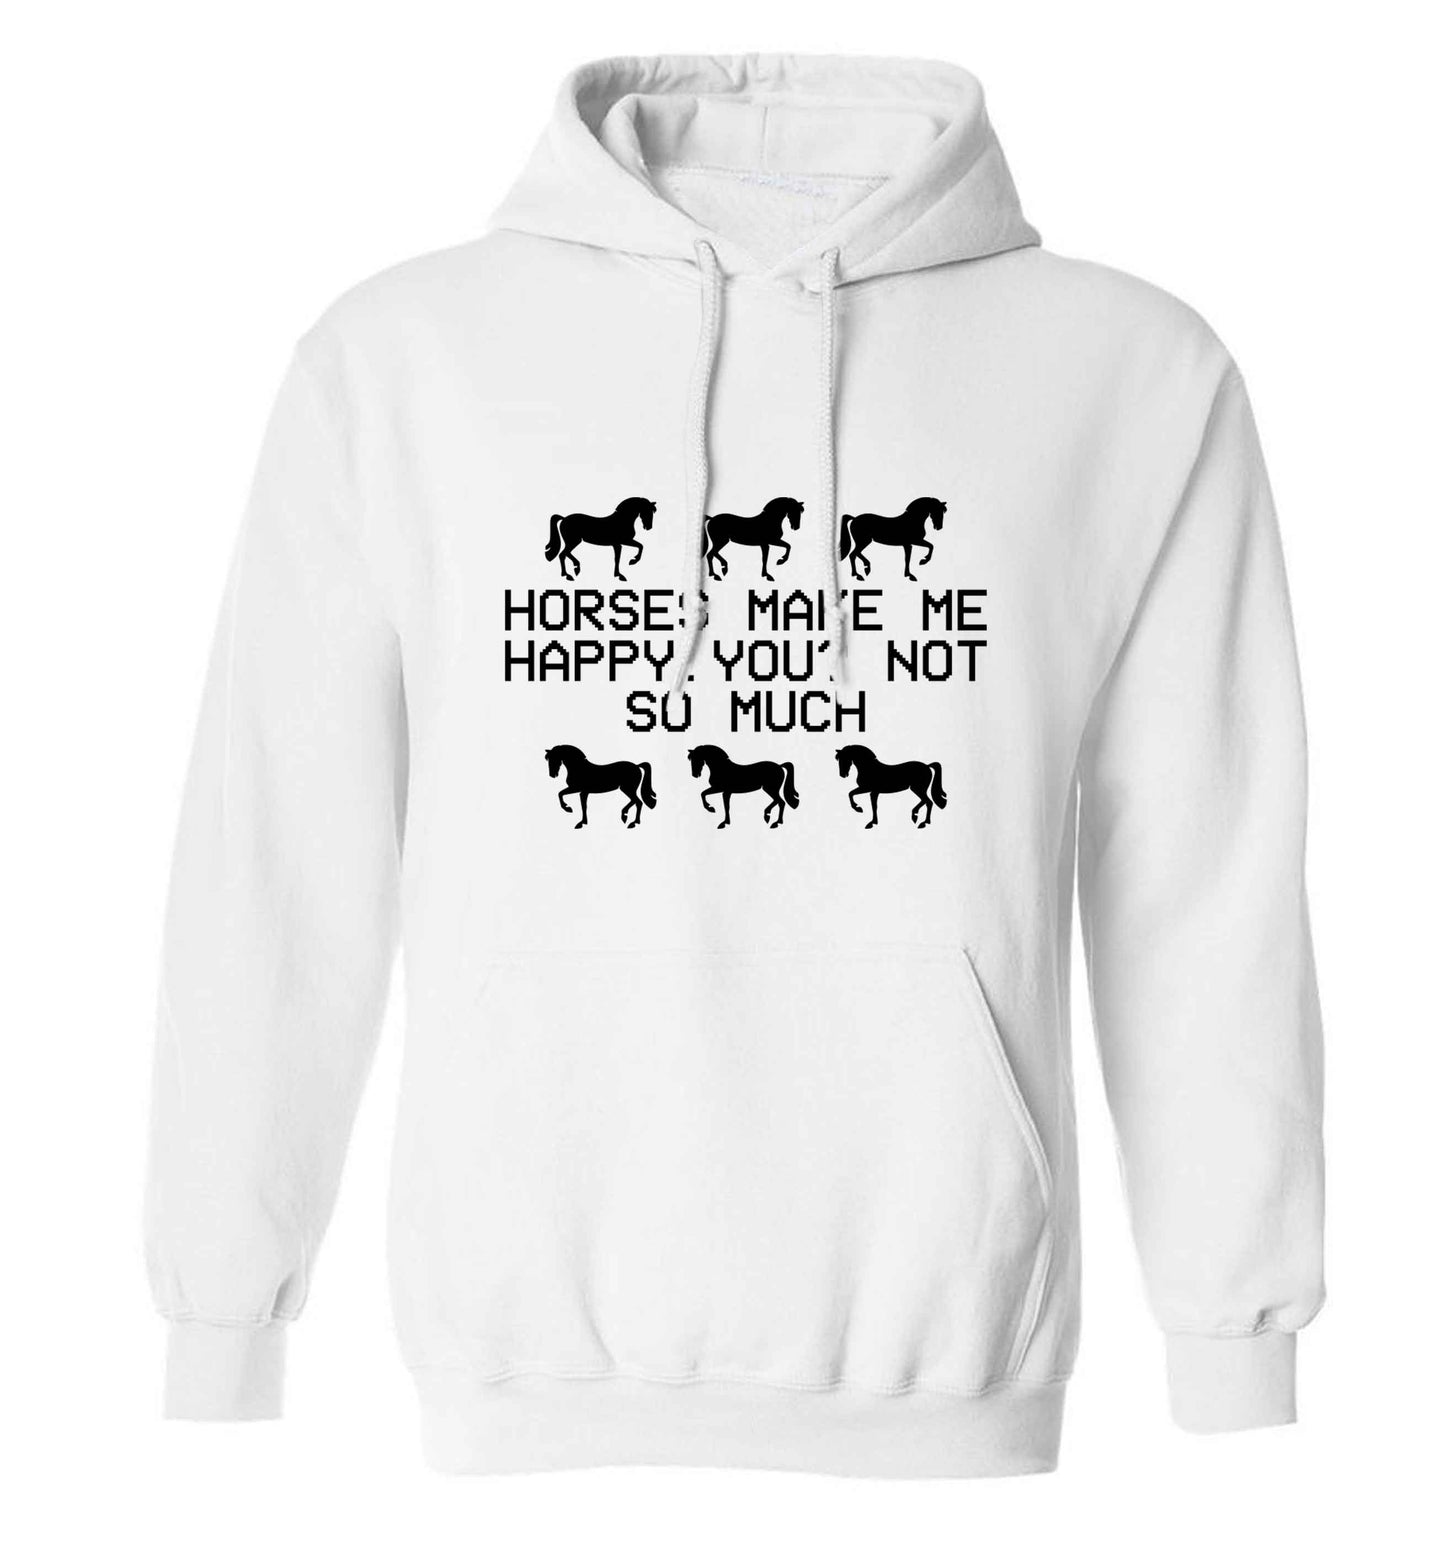 Horses make me happy, you not so much adults unisex white hoodie 2XL